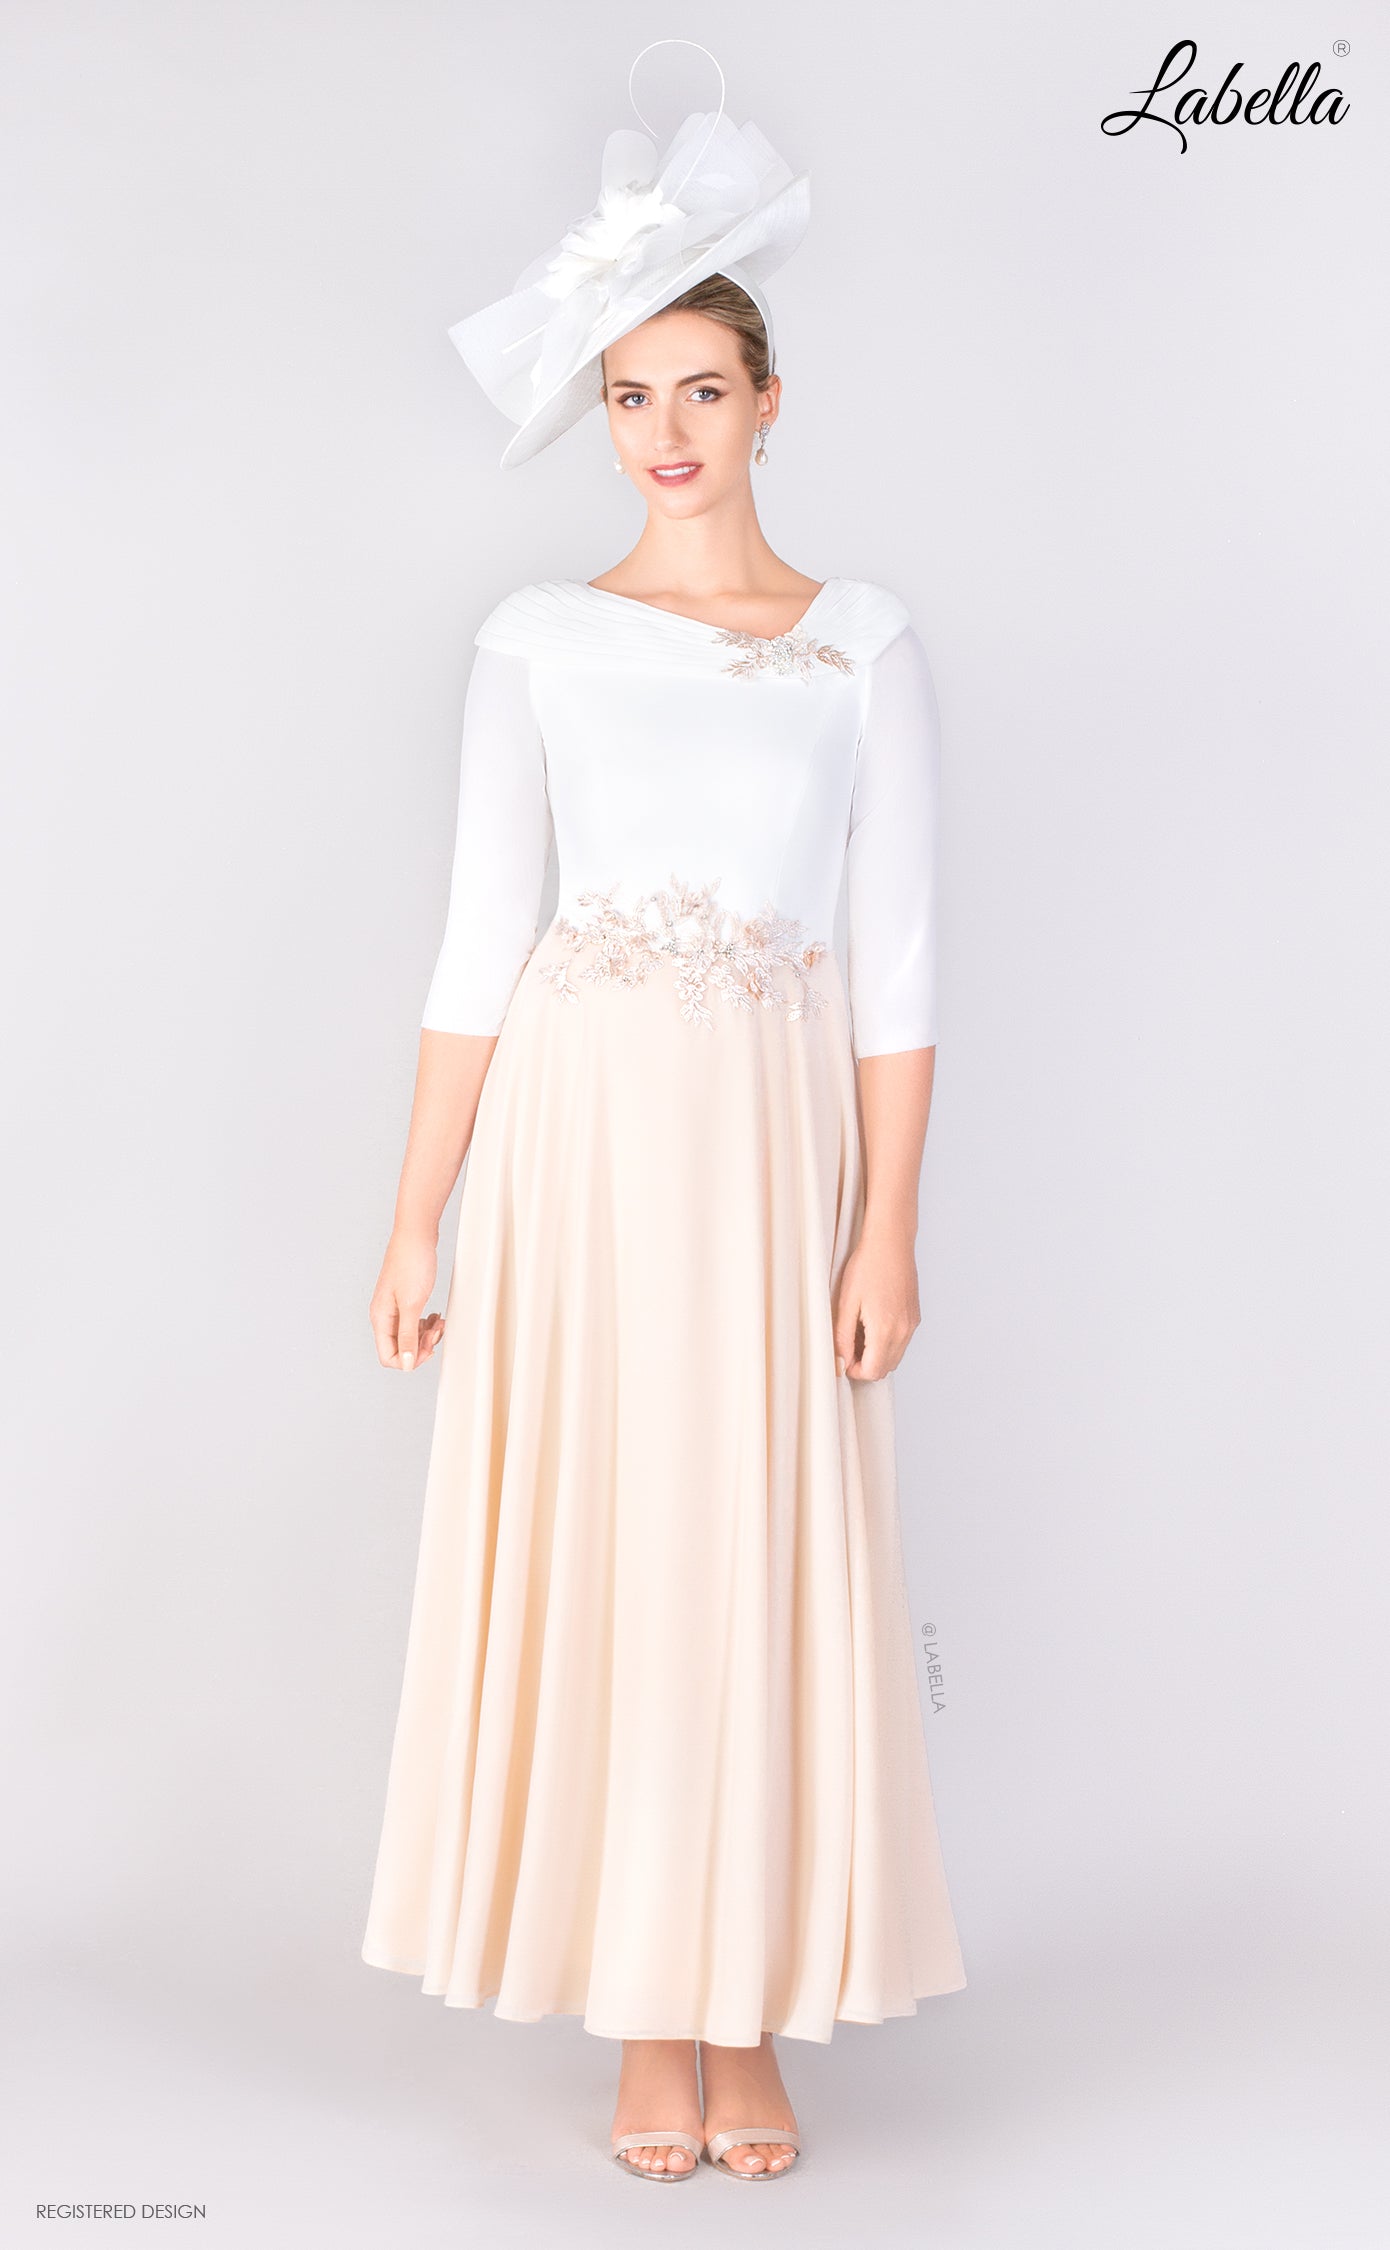 Ivory/Champagne Dress With Beading & Floral Detailing